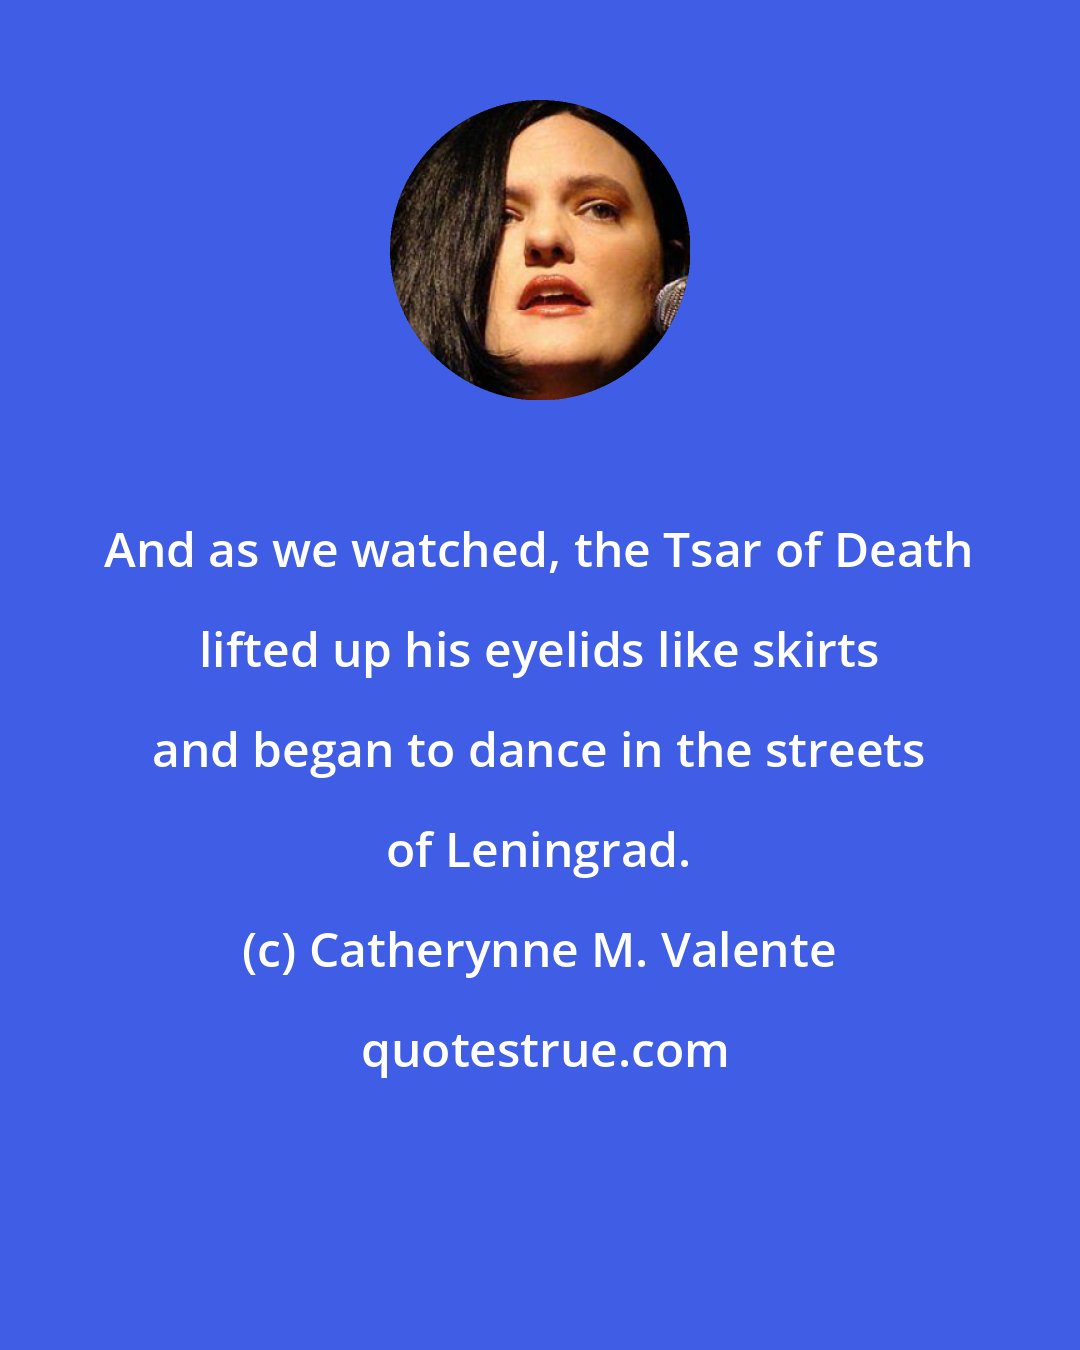 Catherynne M. Valente: And as we watched, the Tsar of Death lifted up his eyelids like skirts and began to dance in the streets of Leningrad.